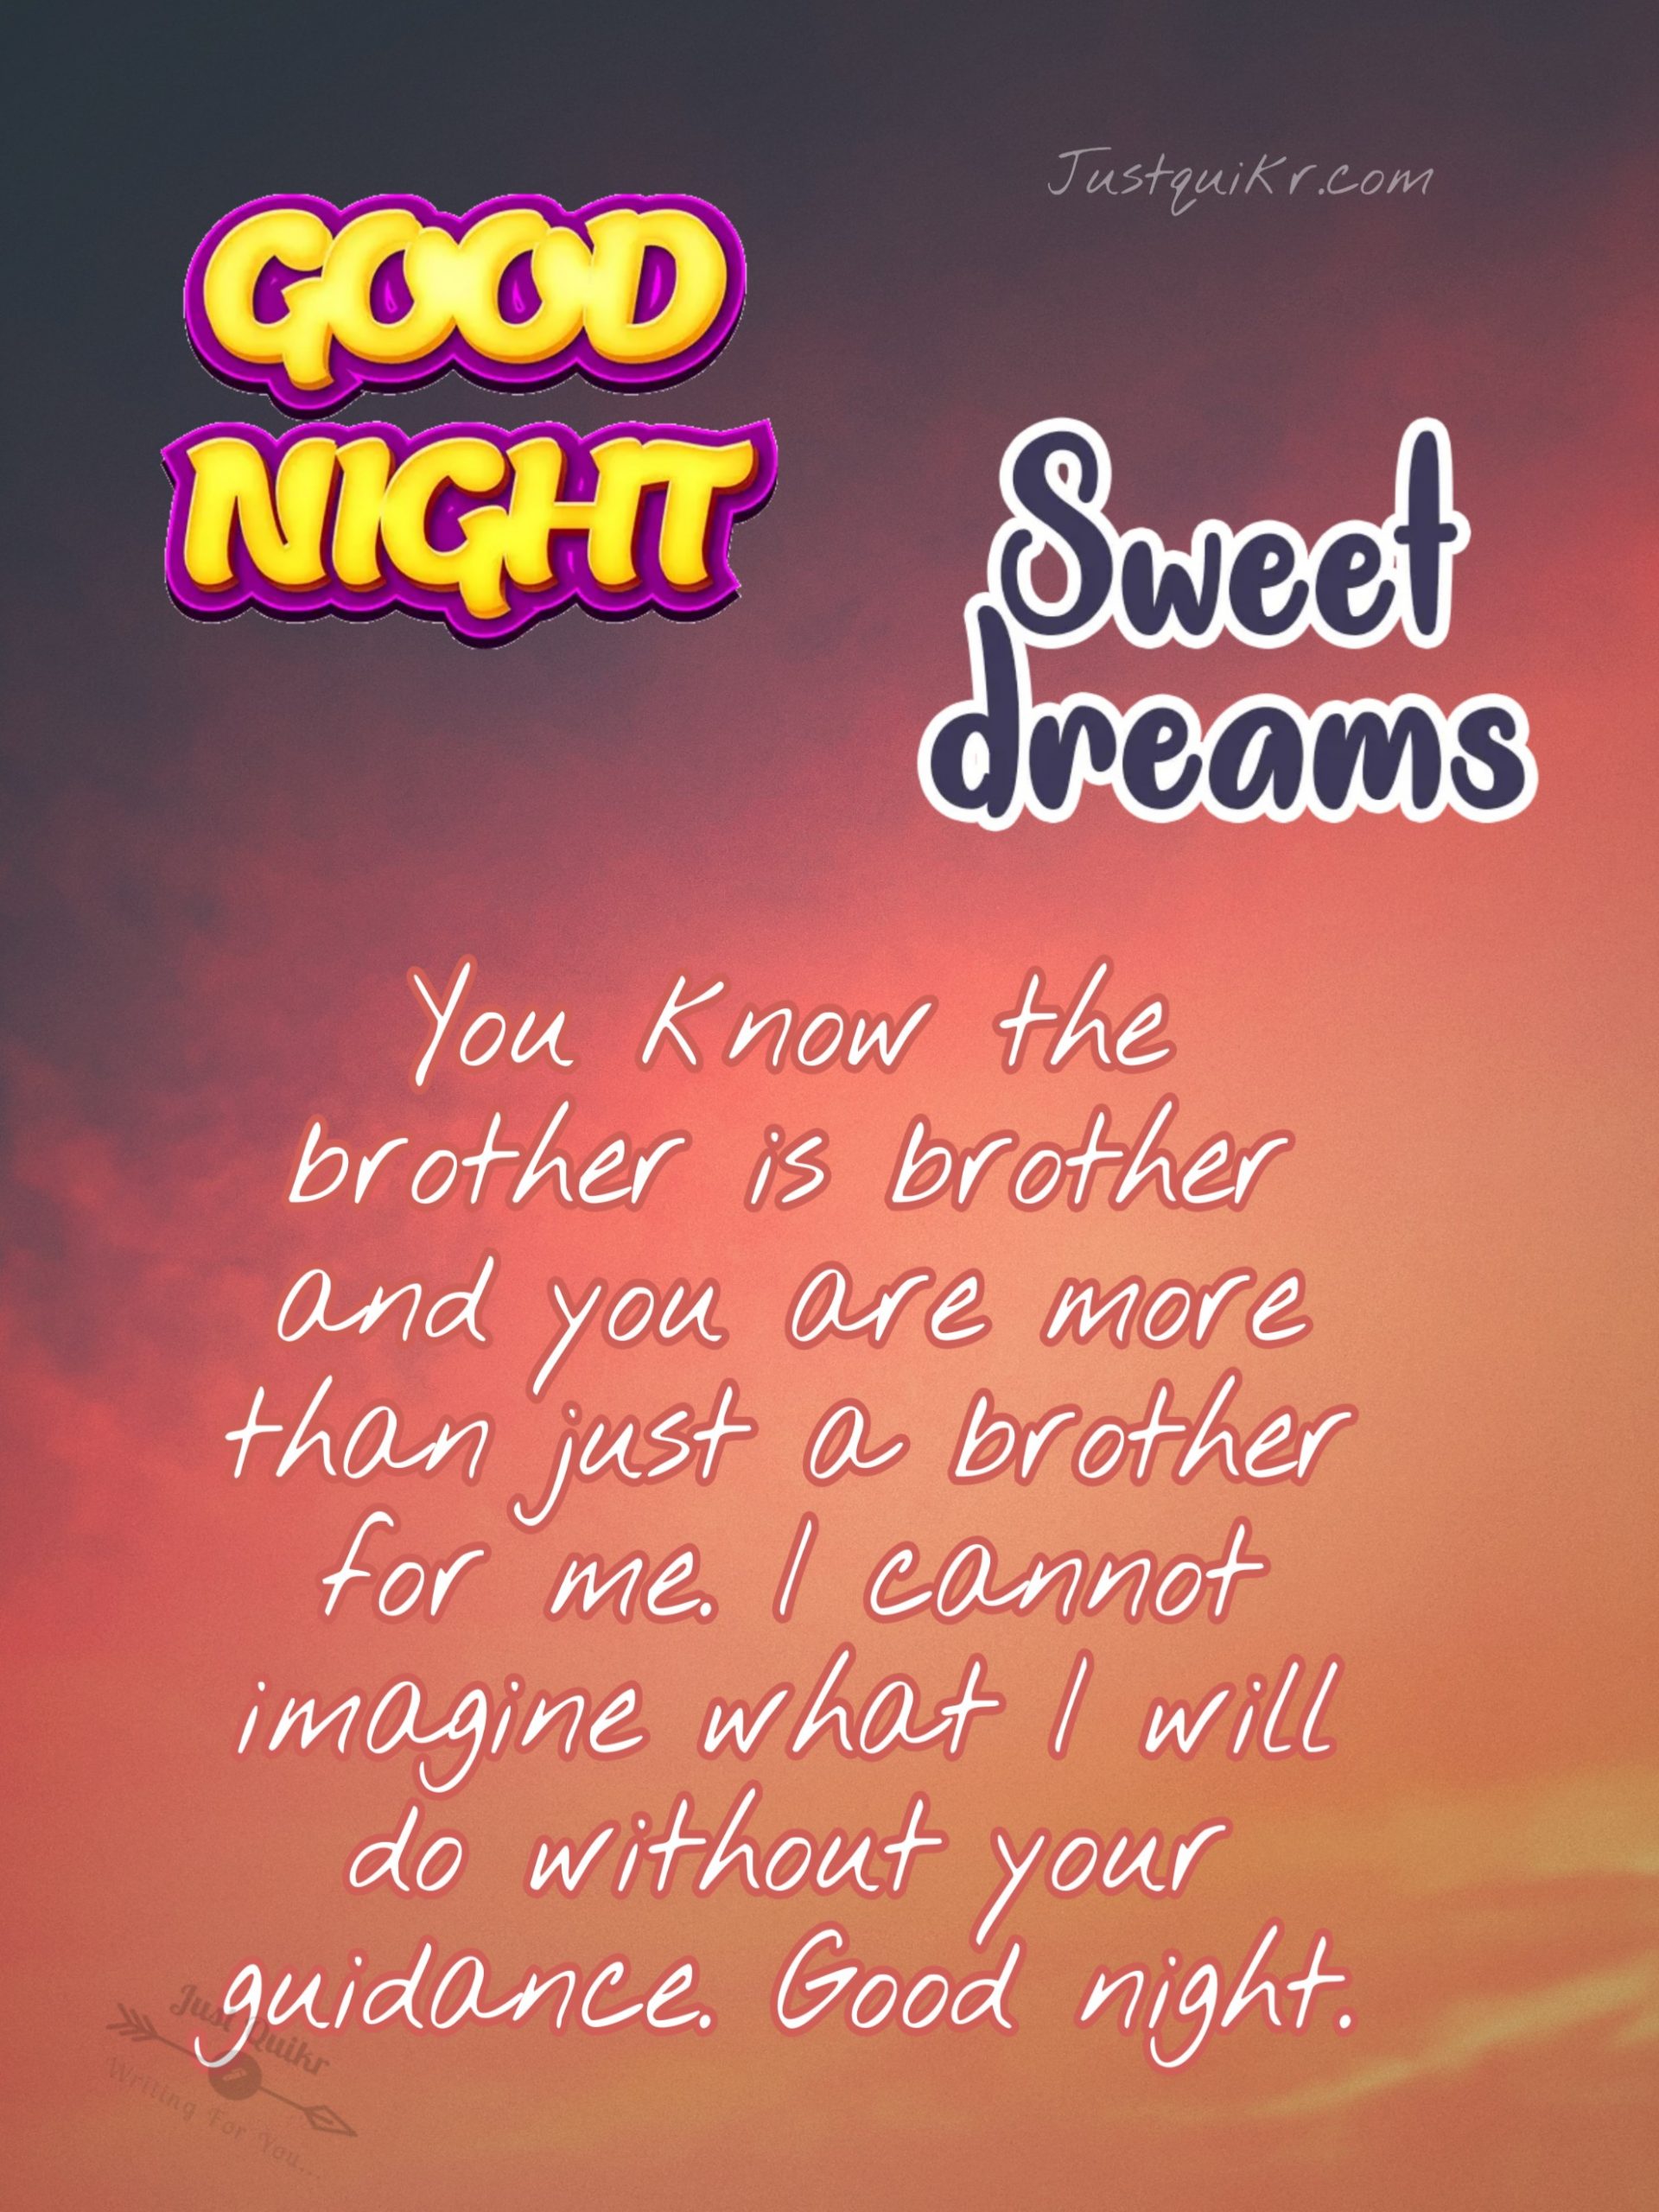 Good Night HD Pics Images For Elder Brother